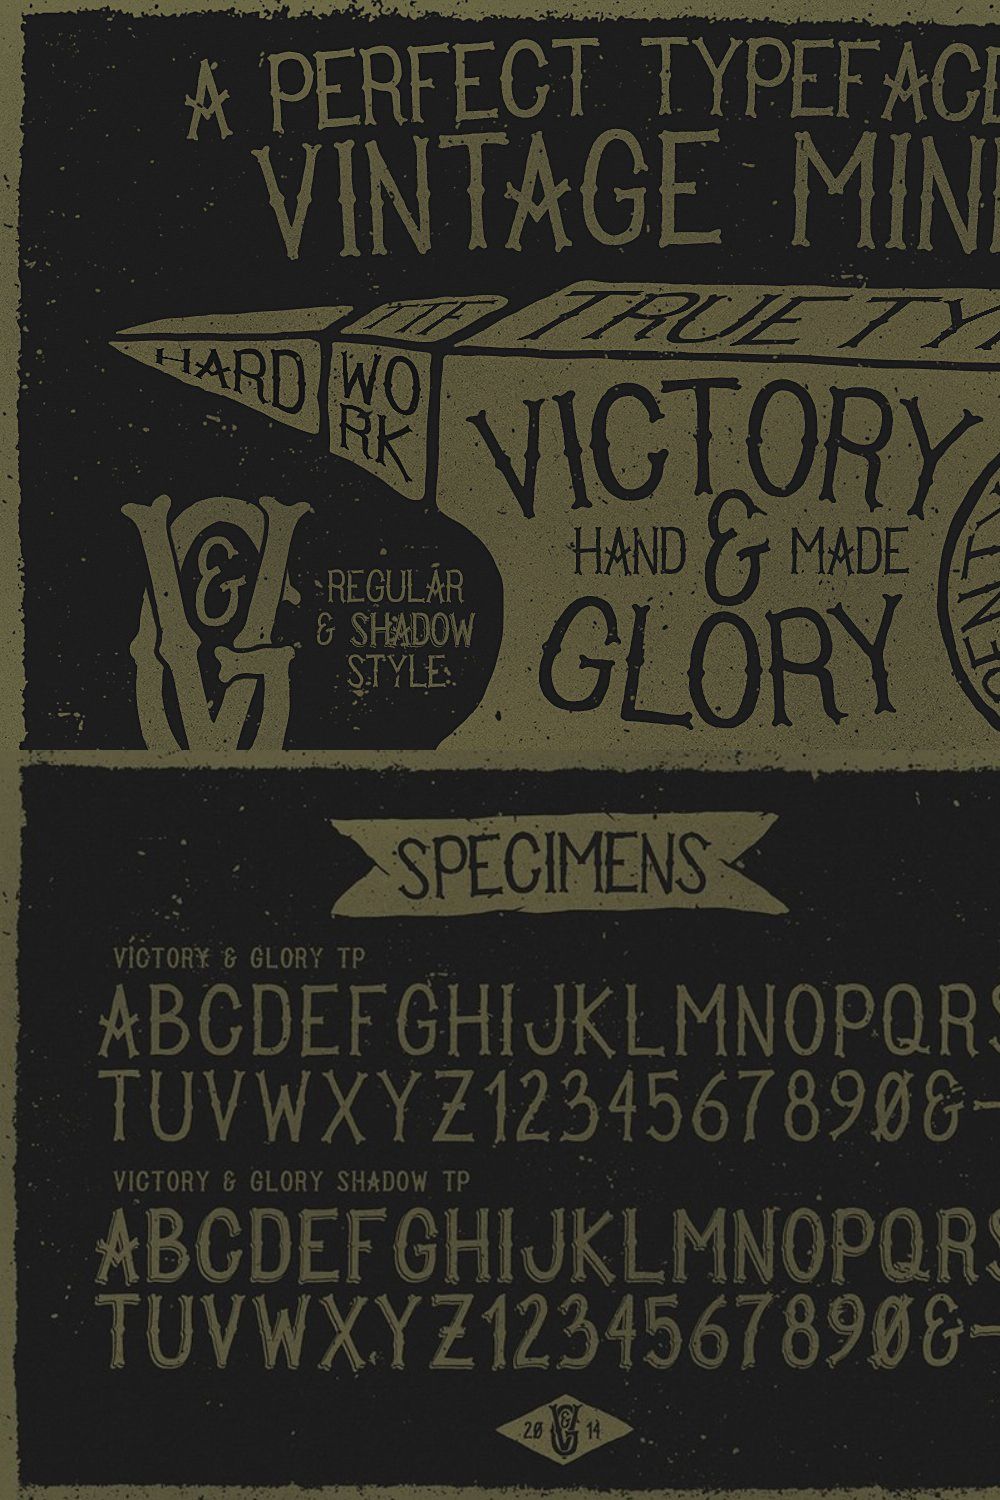 Victory & Glory TP + Extras pinterest preview image.